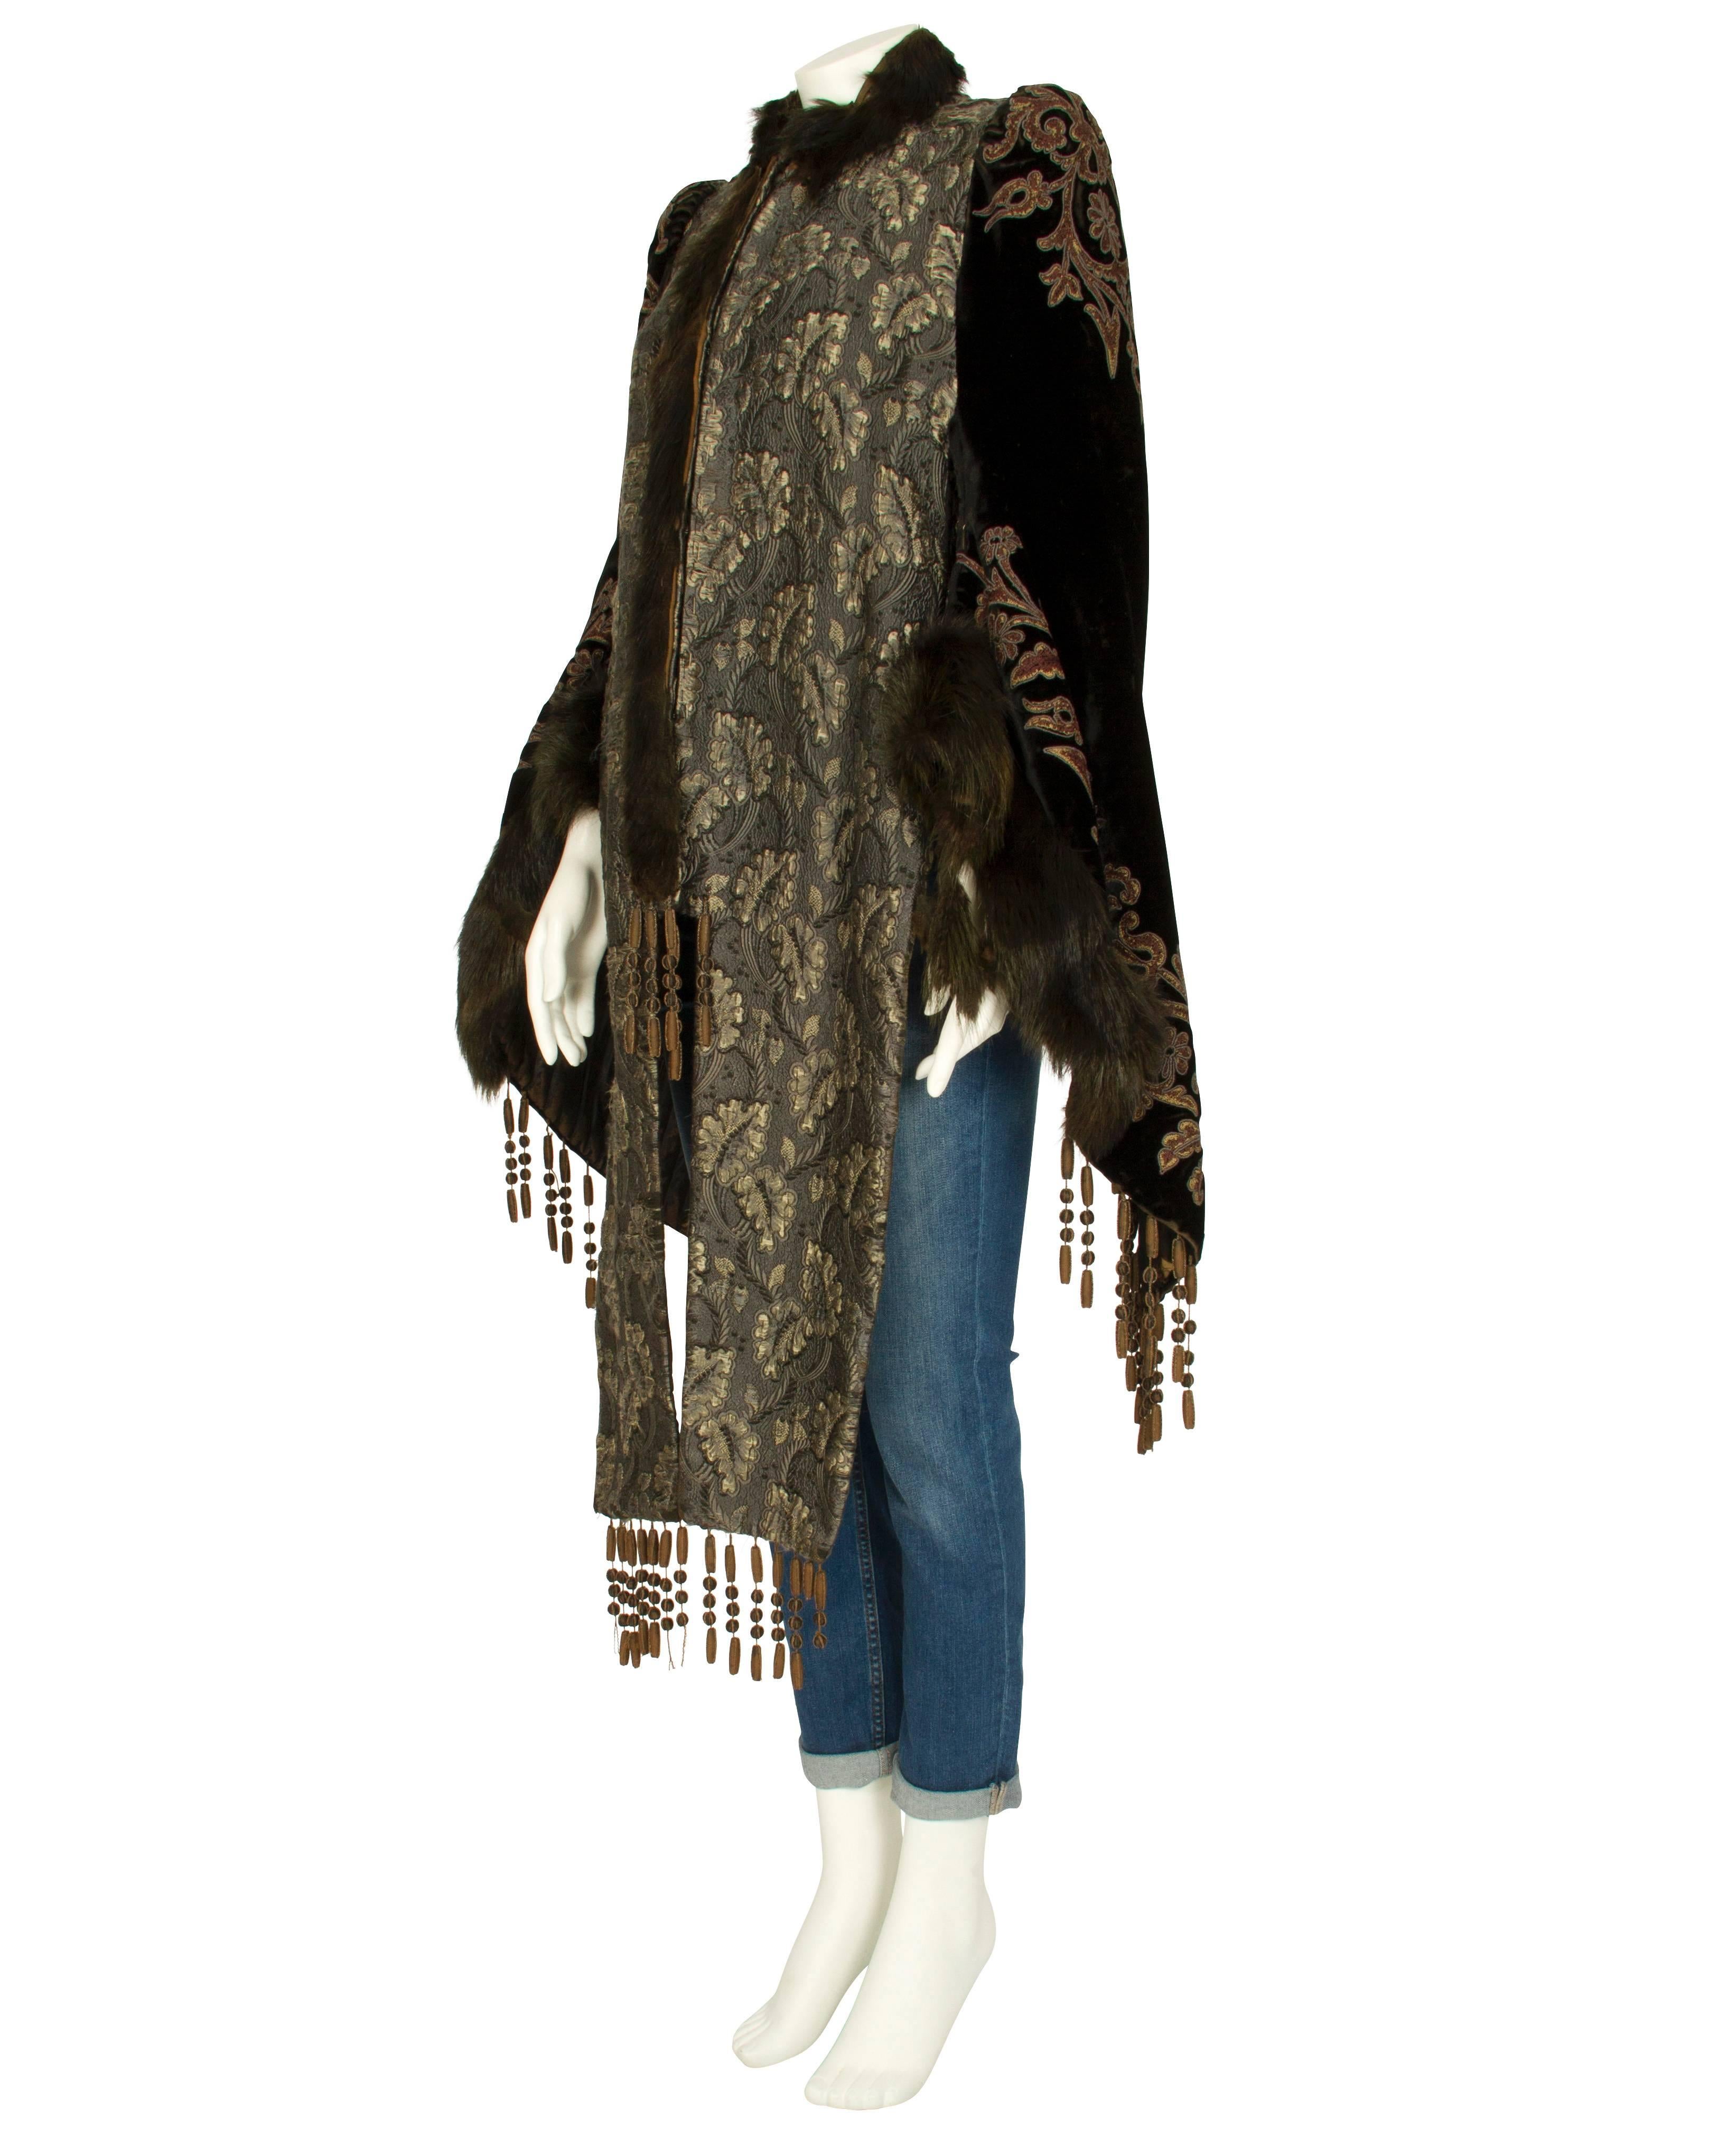 This exquisite embroidered jacket blends oriental look with aristocratic flair. Unique features include an intricate brocade pattern with a chevron quilted back and gathered velvet bell shaped sleeves. The fur neck and sleeve trim add to luxurious